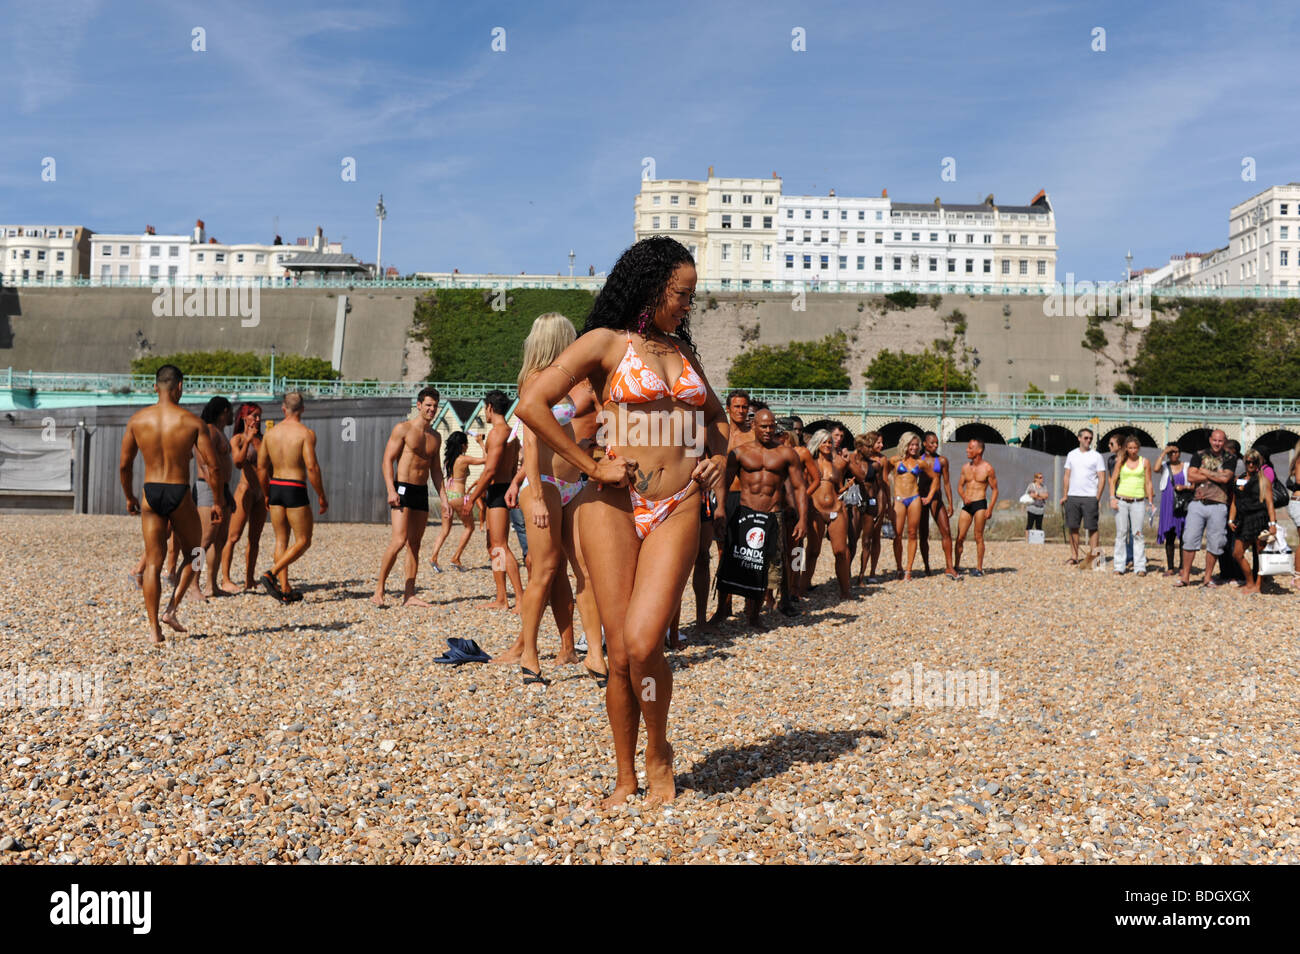 Contestants in the Fame UK bodybuilding championships pose for photographers on the beach at Brighton Sussex UK Stock Photo